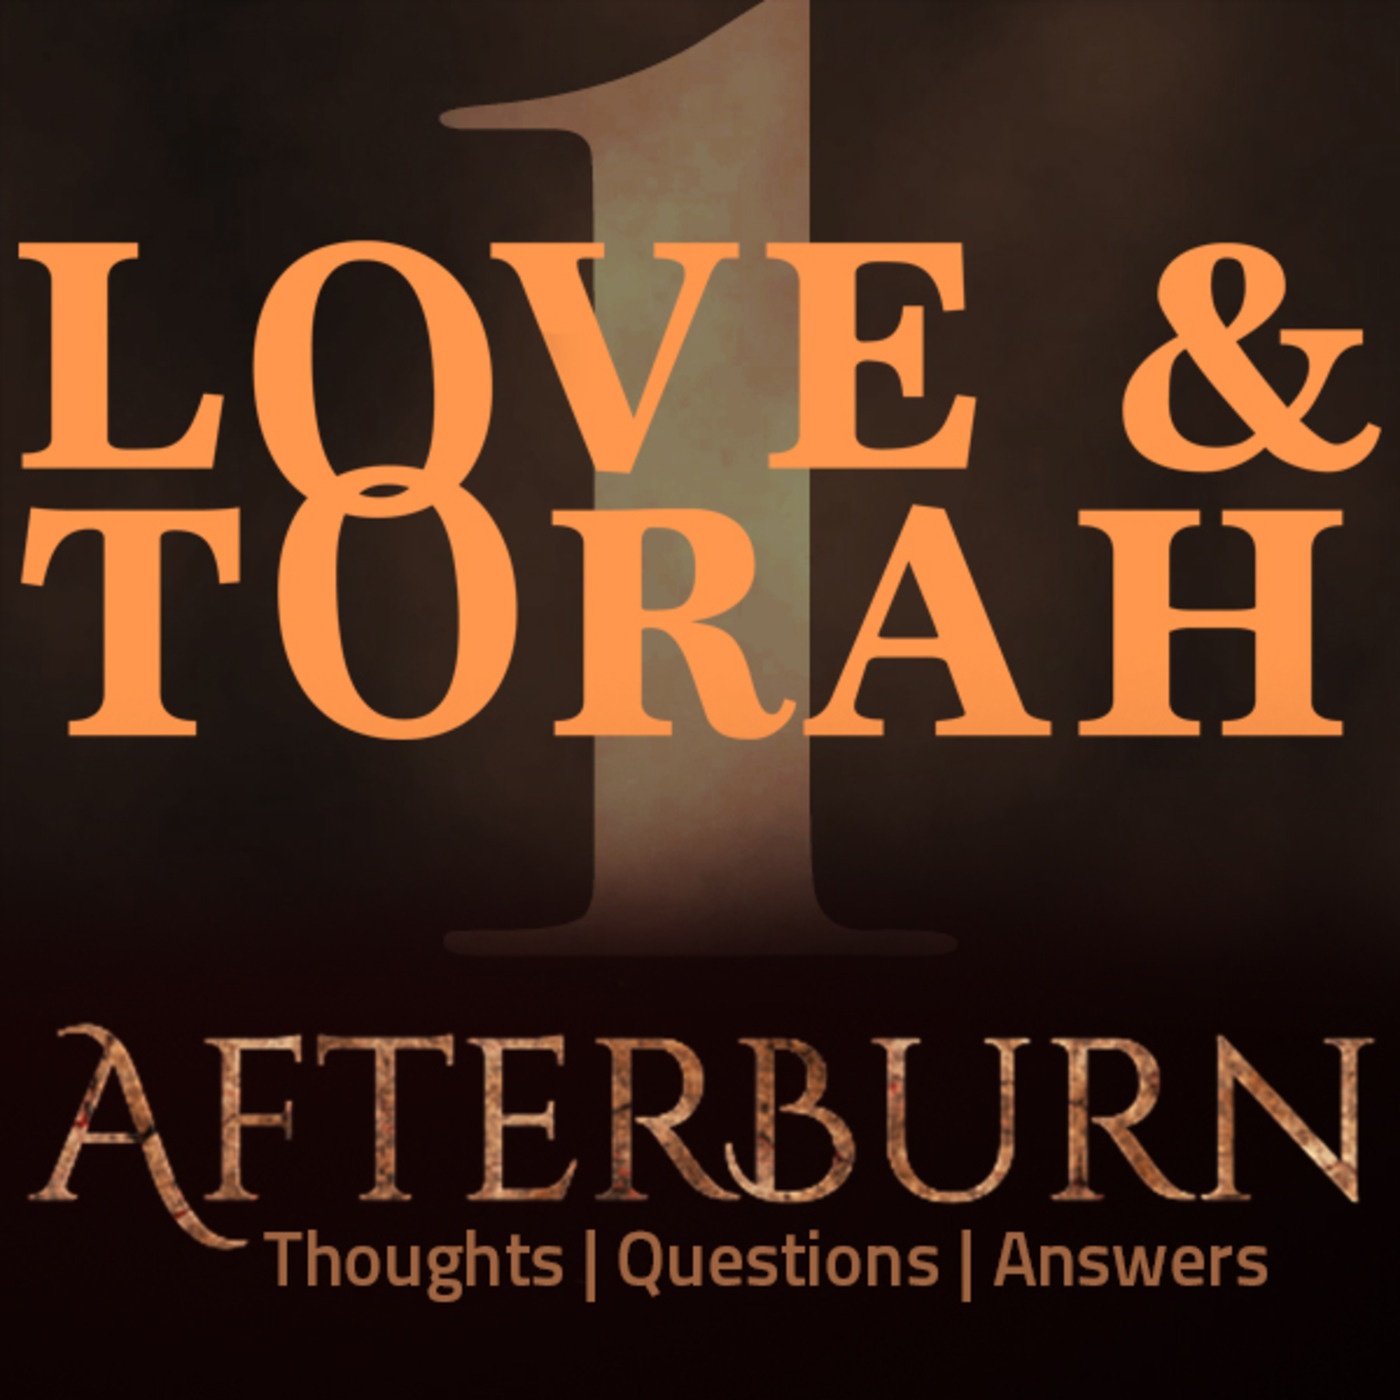 Afterburn: Thoughts, Q&A on Love and Torah - Part 1